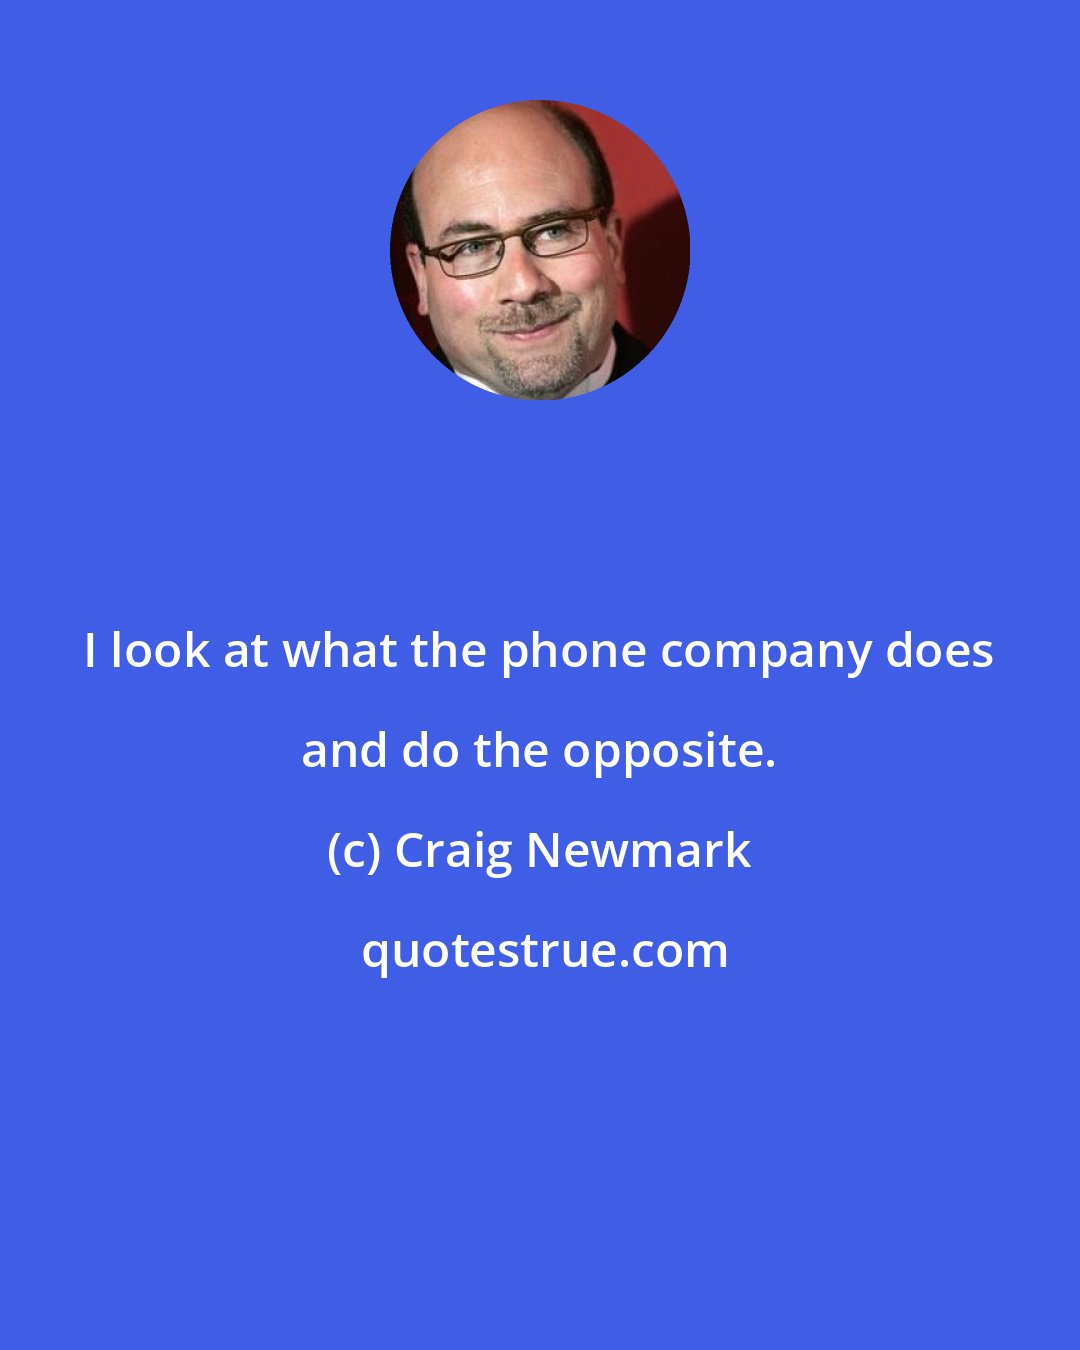 Craig Newmark: I look at what the phone company does and do the opposite.